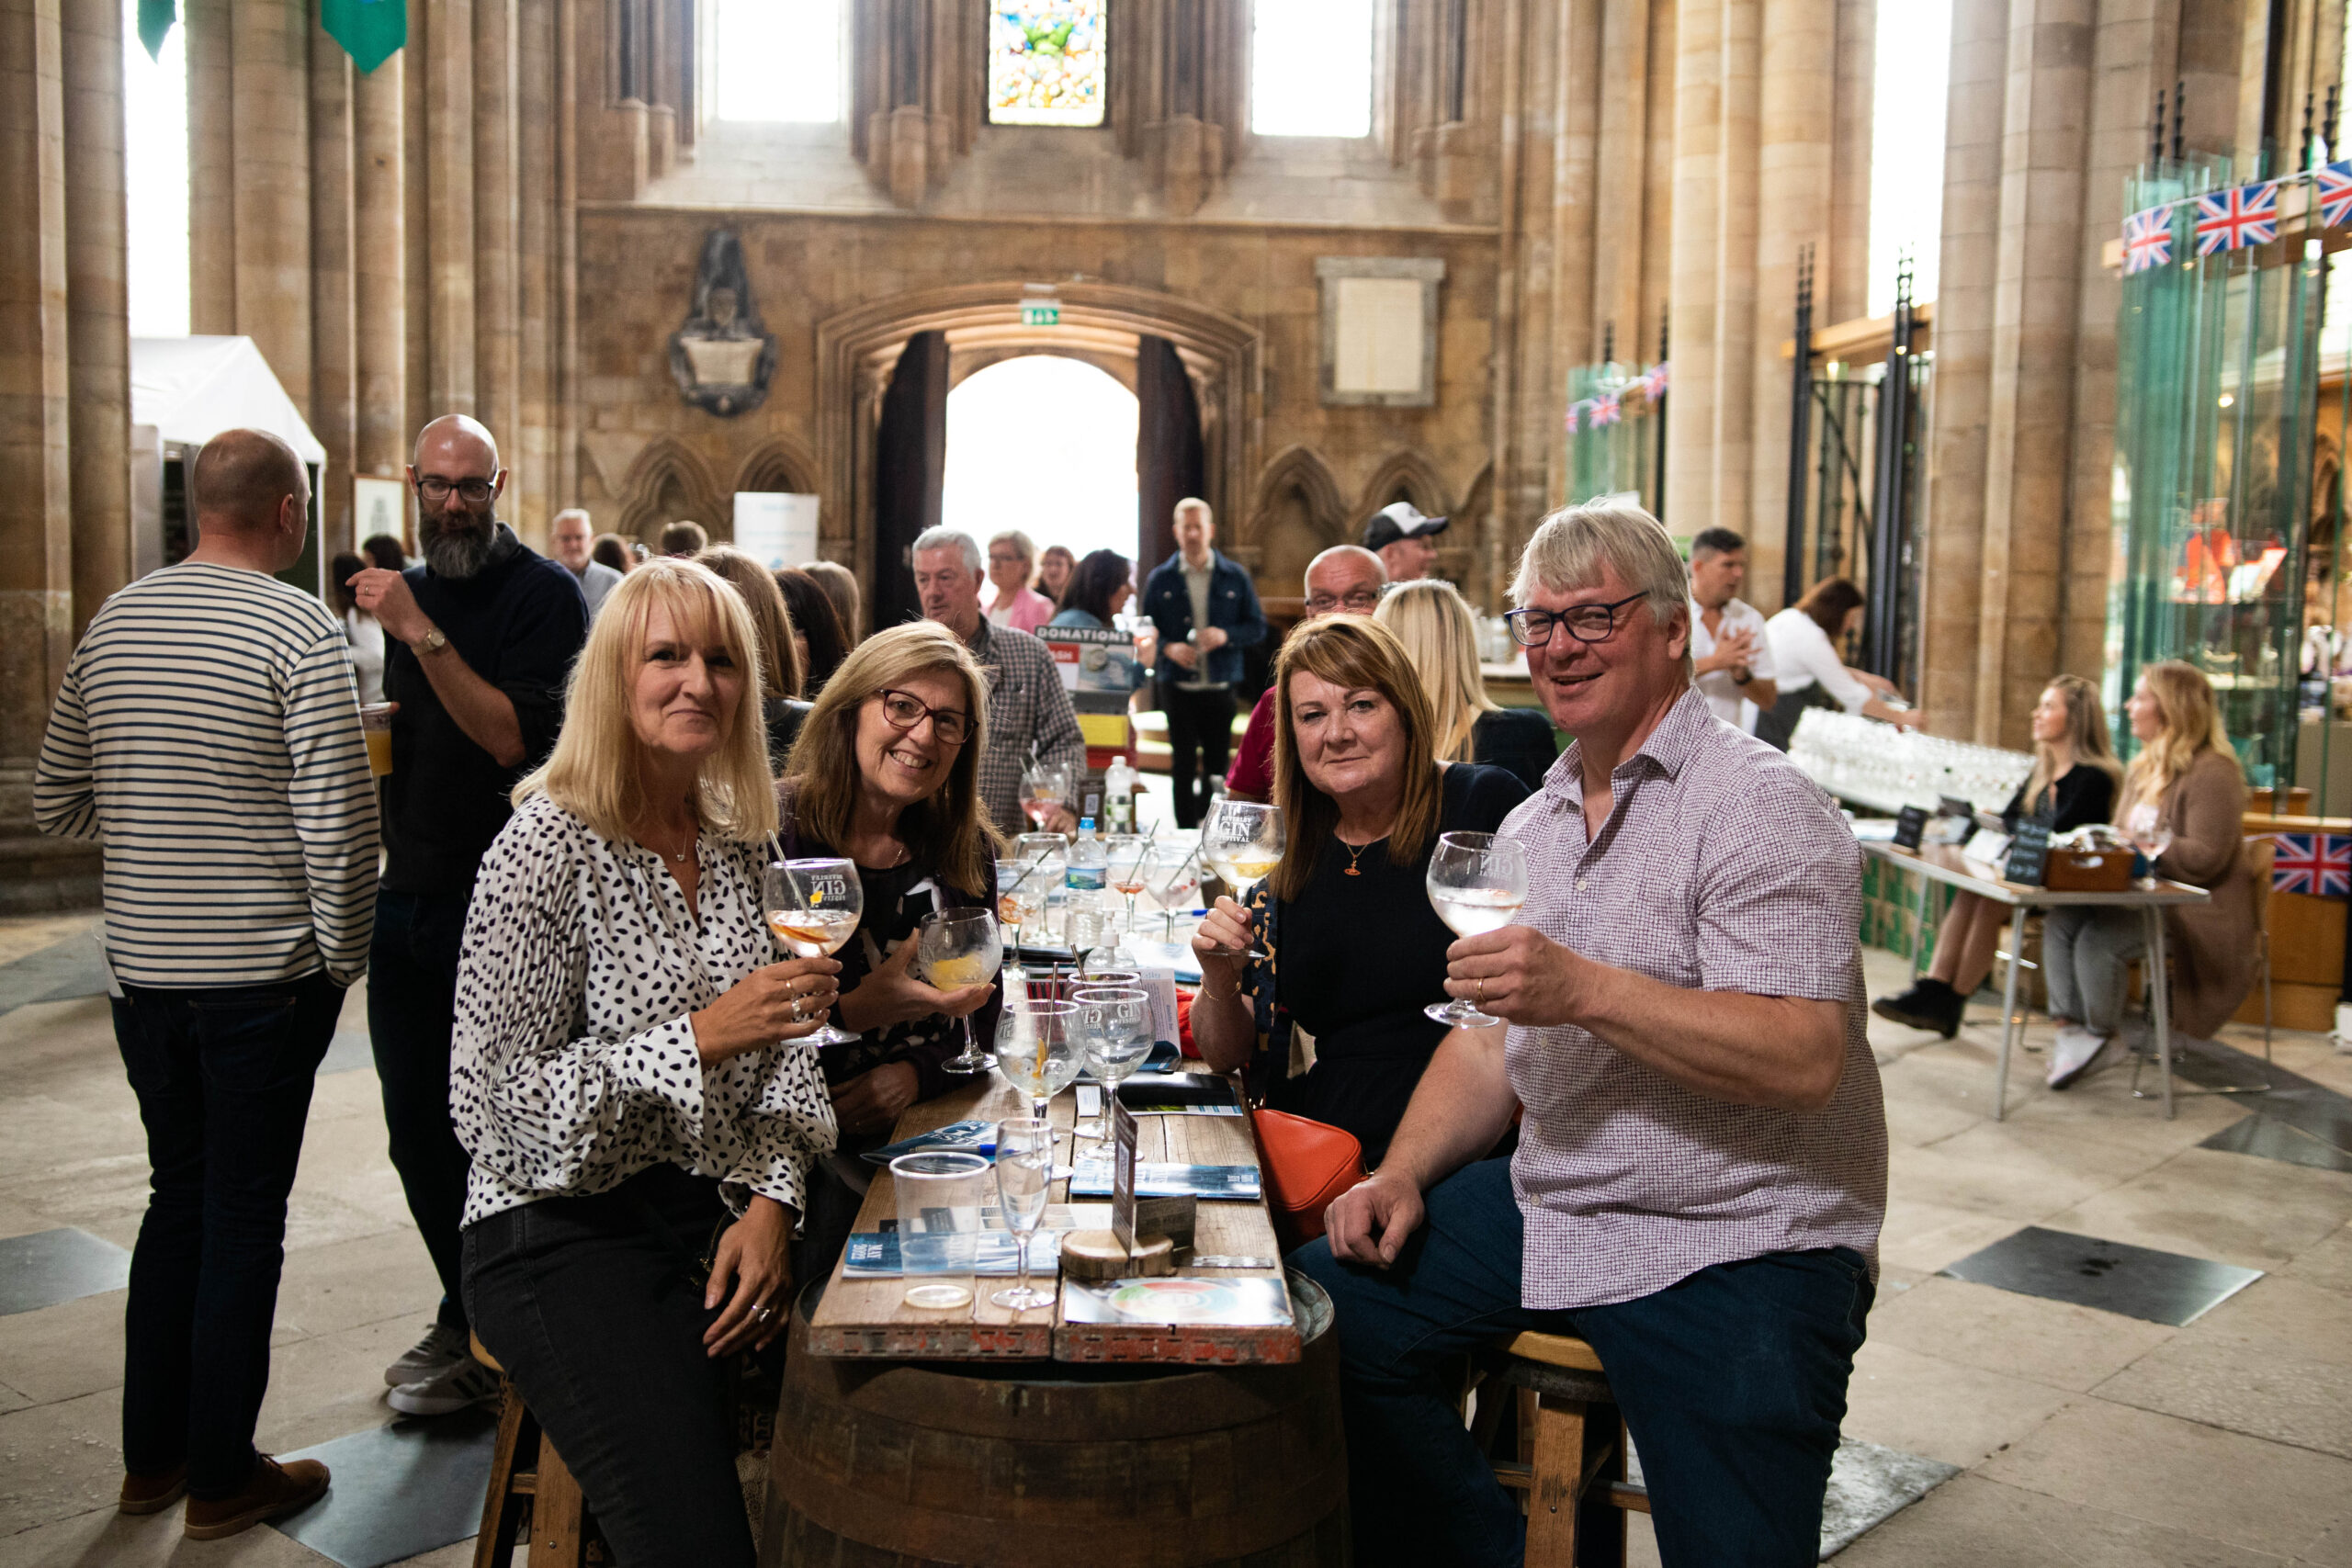 Beverley Gin Festival is back this May – even bigger and better!